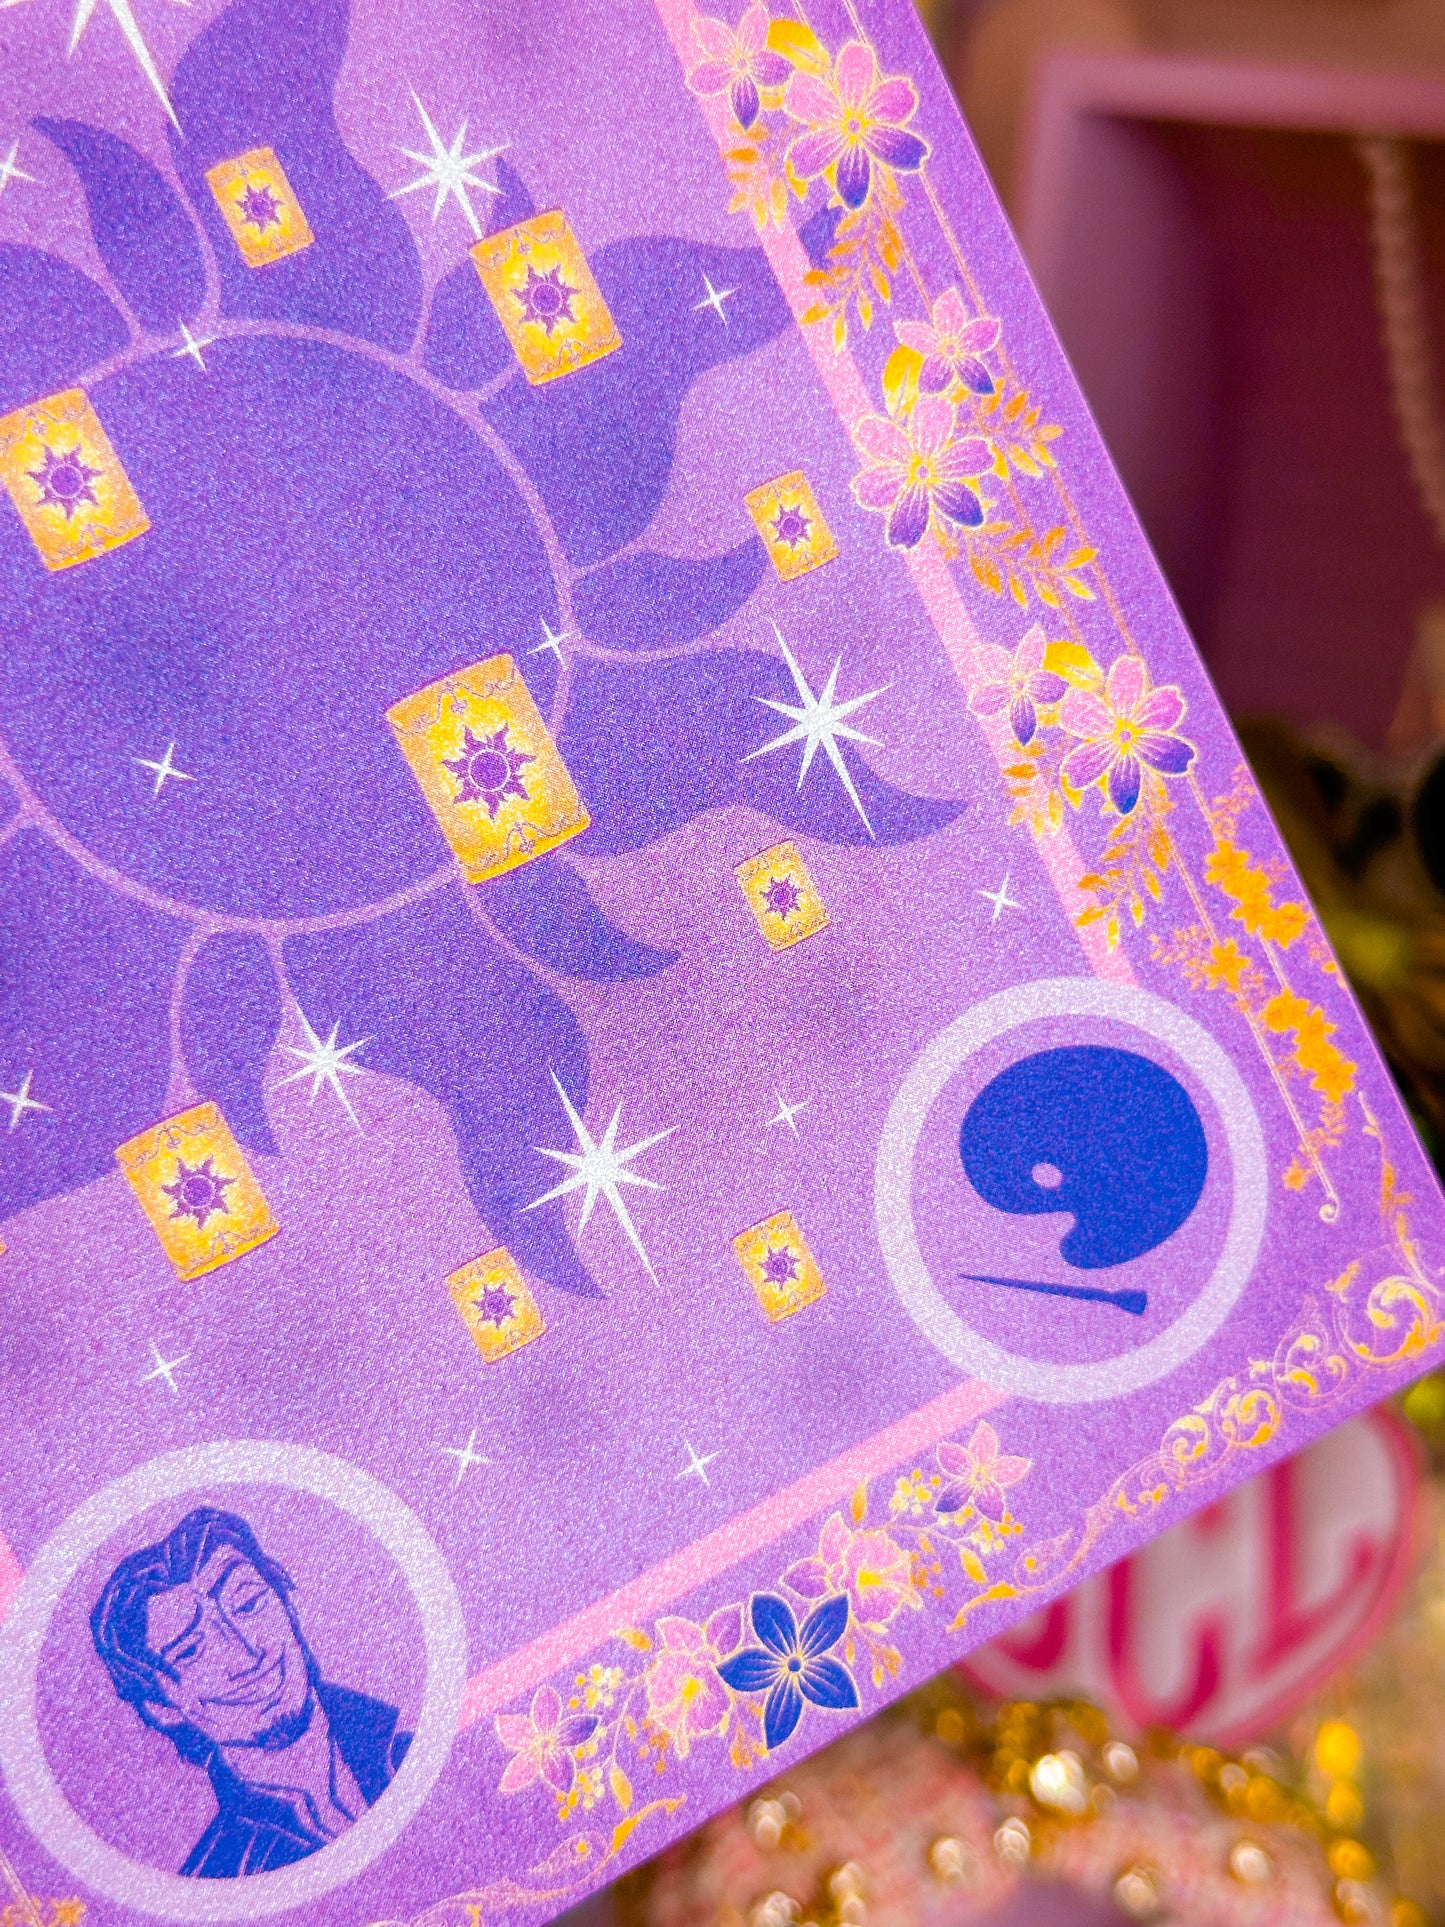 5x7 Pearlescent Art Card - Storybook Cover (Rapunzel)